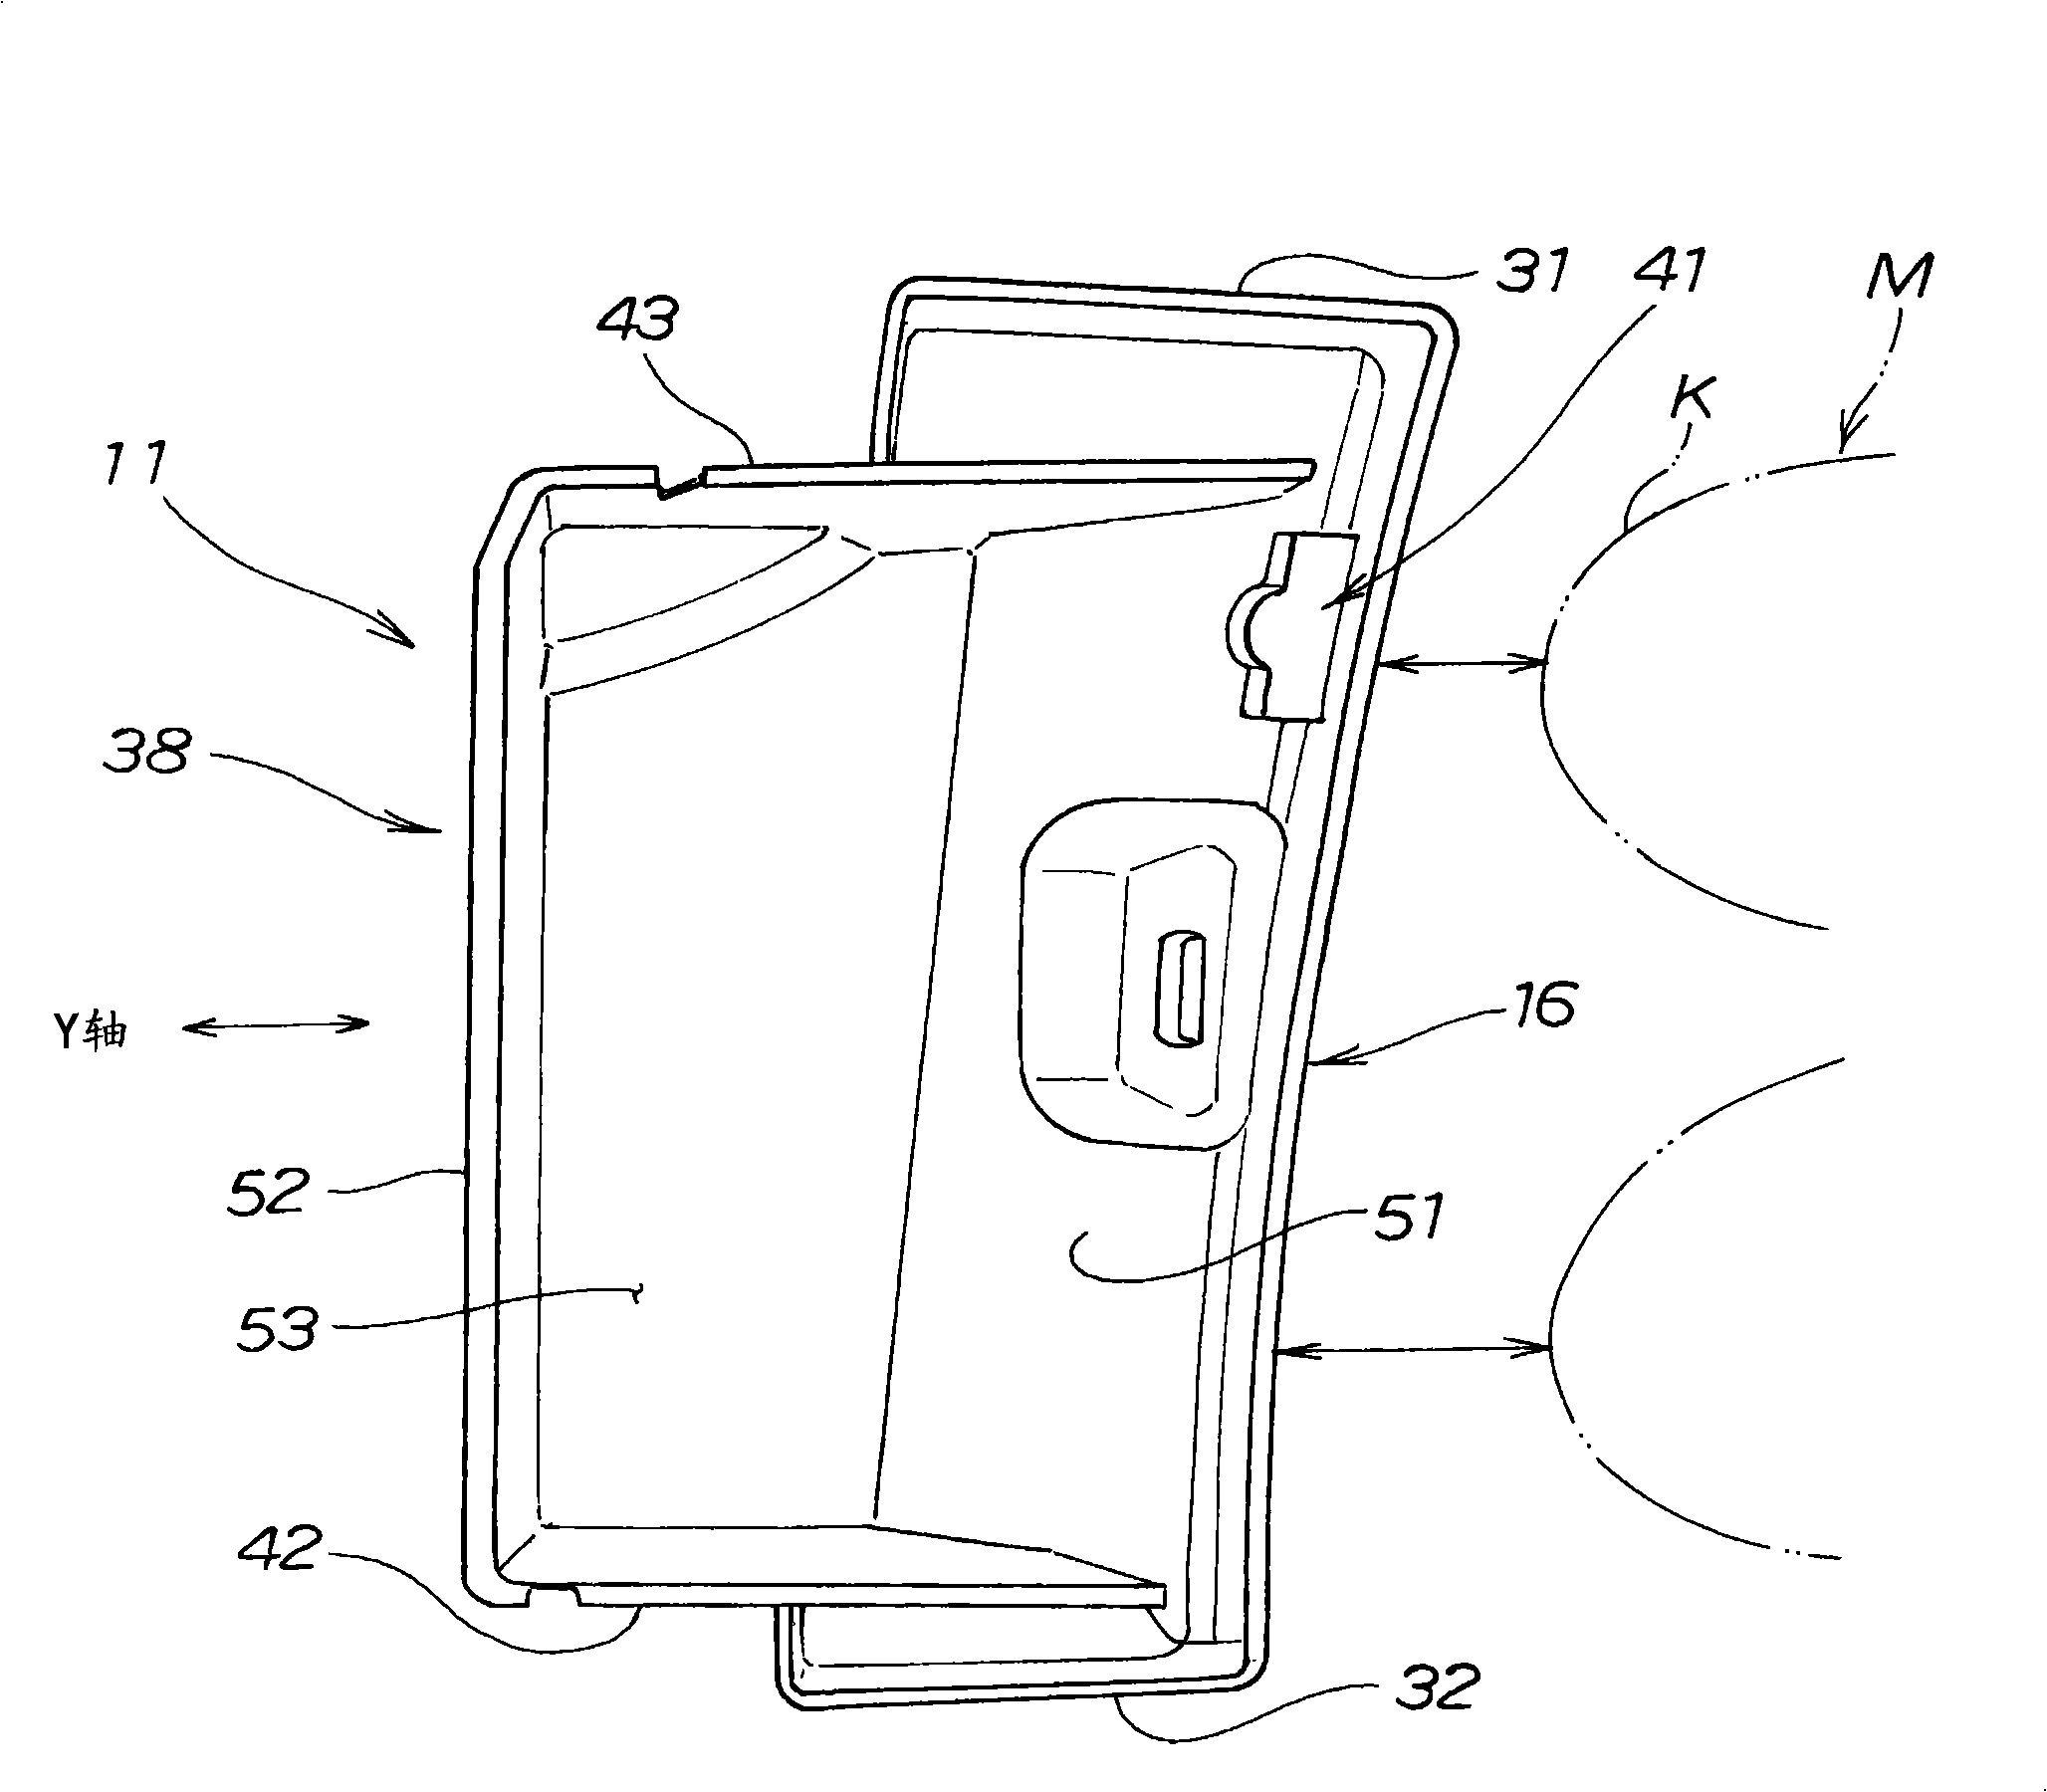 Storage device for vehicle